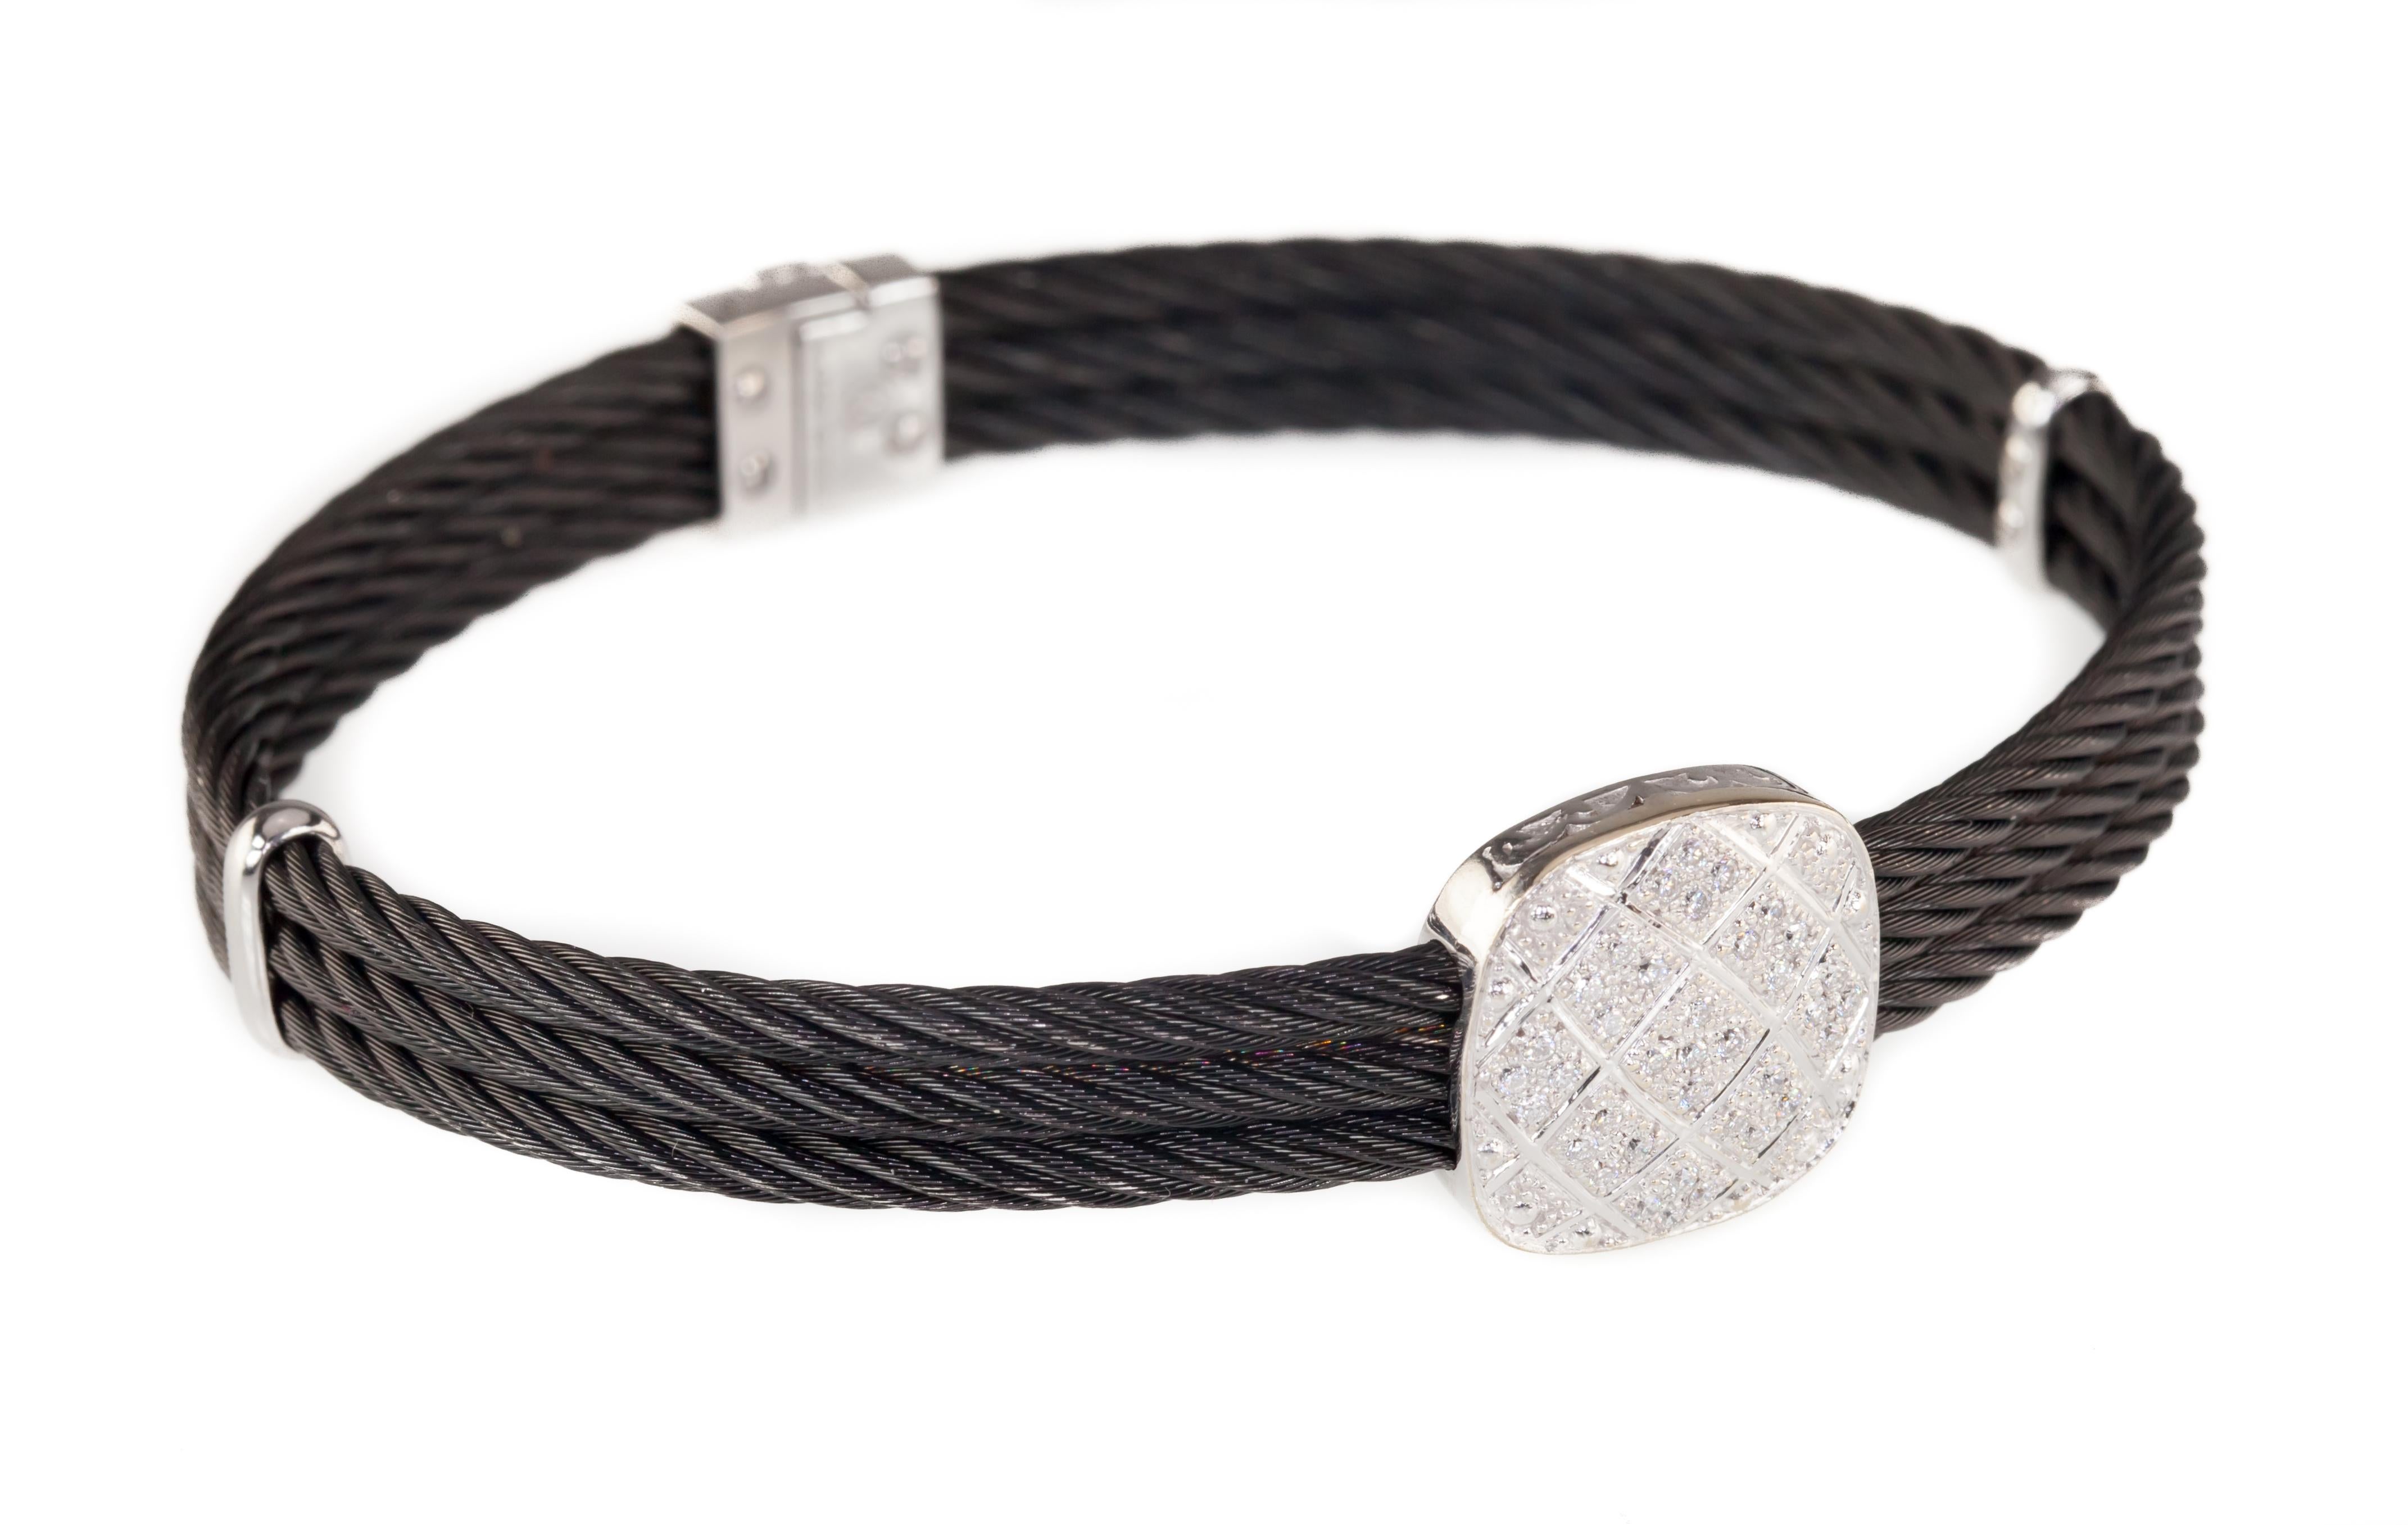 Gorgeous Three-Row Steel Cable Bracelet by Charriol
Features 18k White Gold Elements and Plaque
Total Diamond Weight = 0.20 Cts
Average Color = F
Average Clarity = VS1
Width of Band = 7 mm
Total Mass = 18.5 grams
Gorgeous Gift!